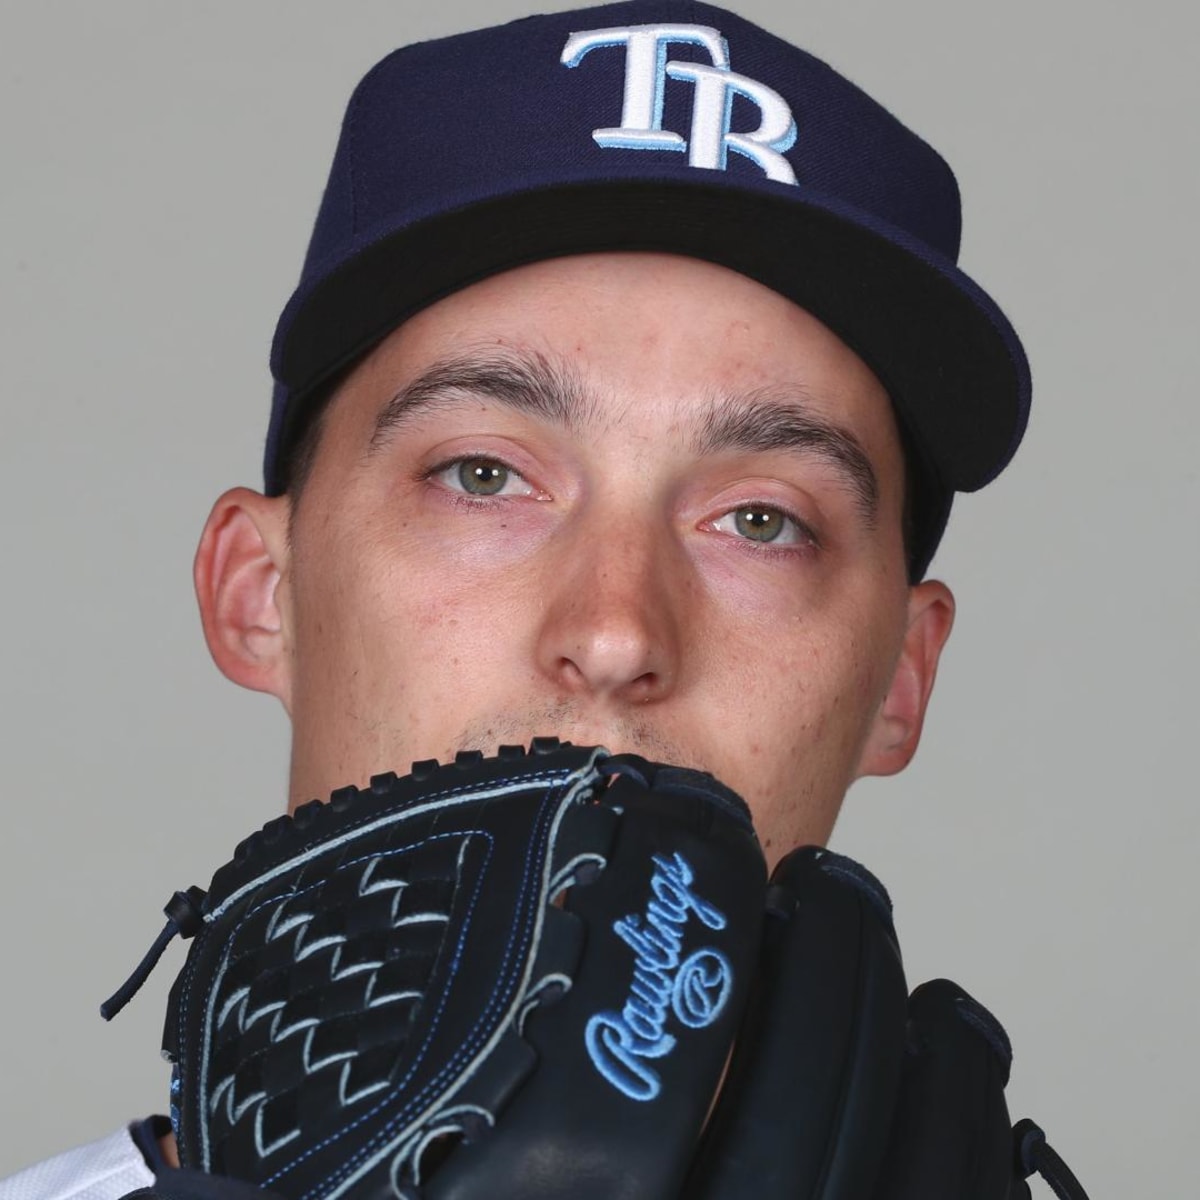 Is Padres pitcher Blake Snell secretly slamming the Rays with latest  Instagram?